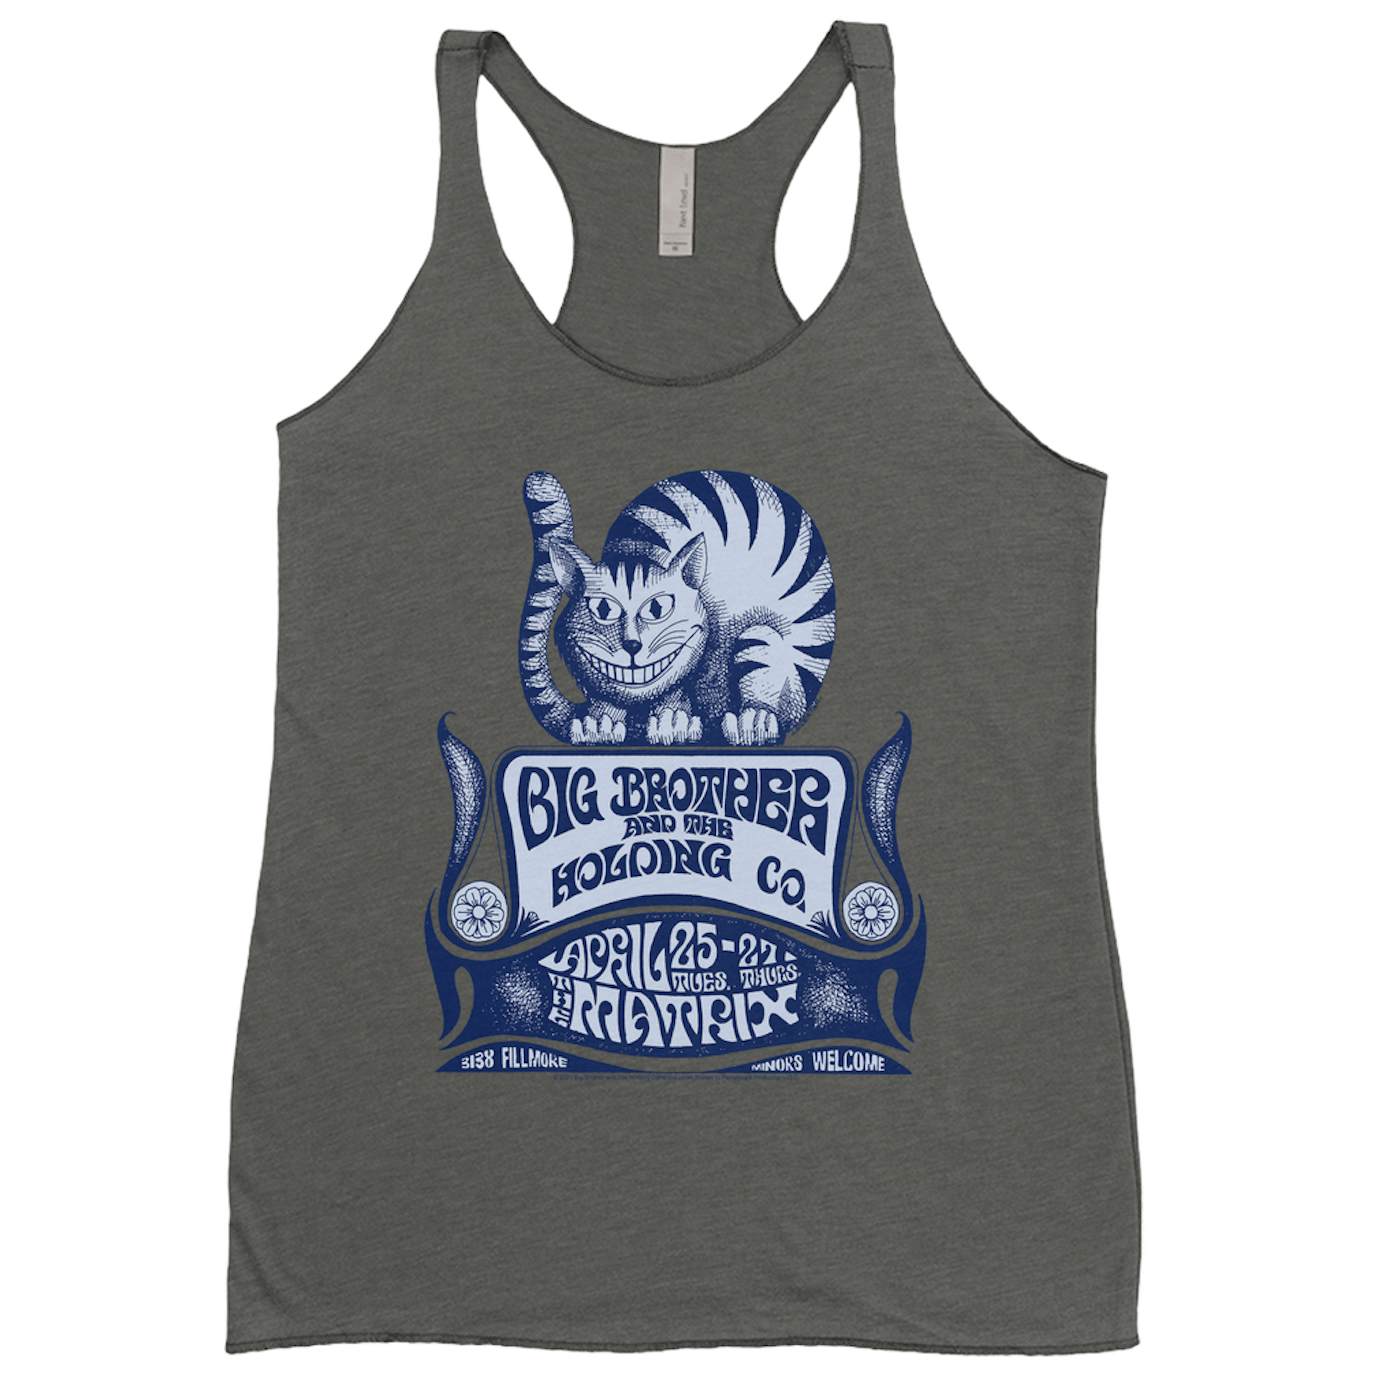 Big Brother & The Holding Company Ladies' Tank Top | Big Brother And The Holding Company Feat. Janis Joplin The Matrix Concert Flyer Big Brother and The Holding Company Shirt